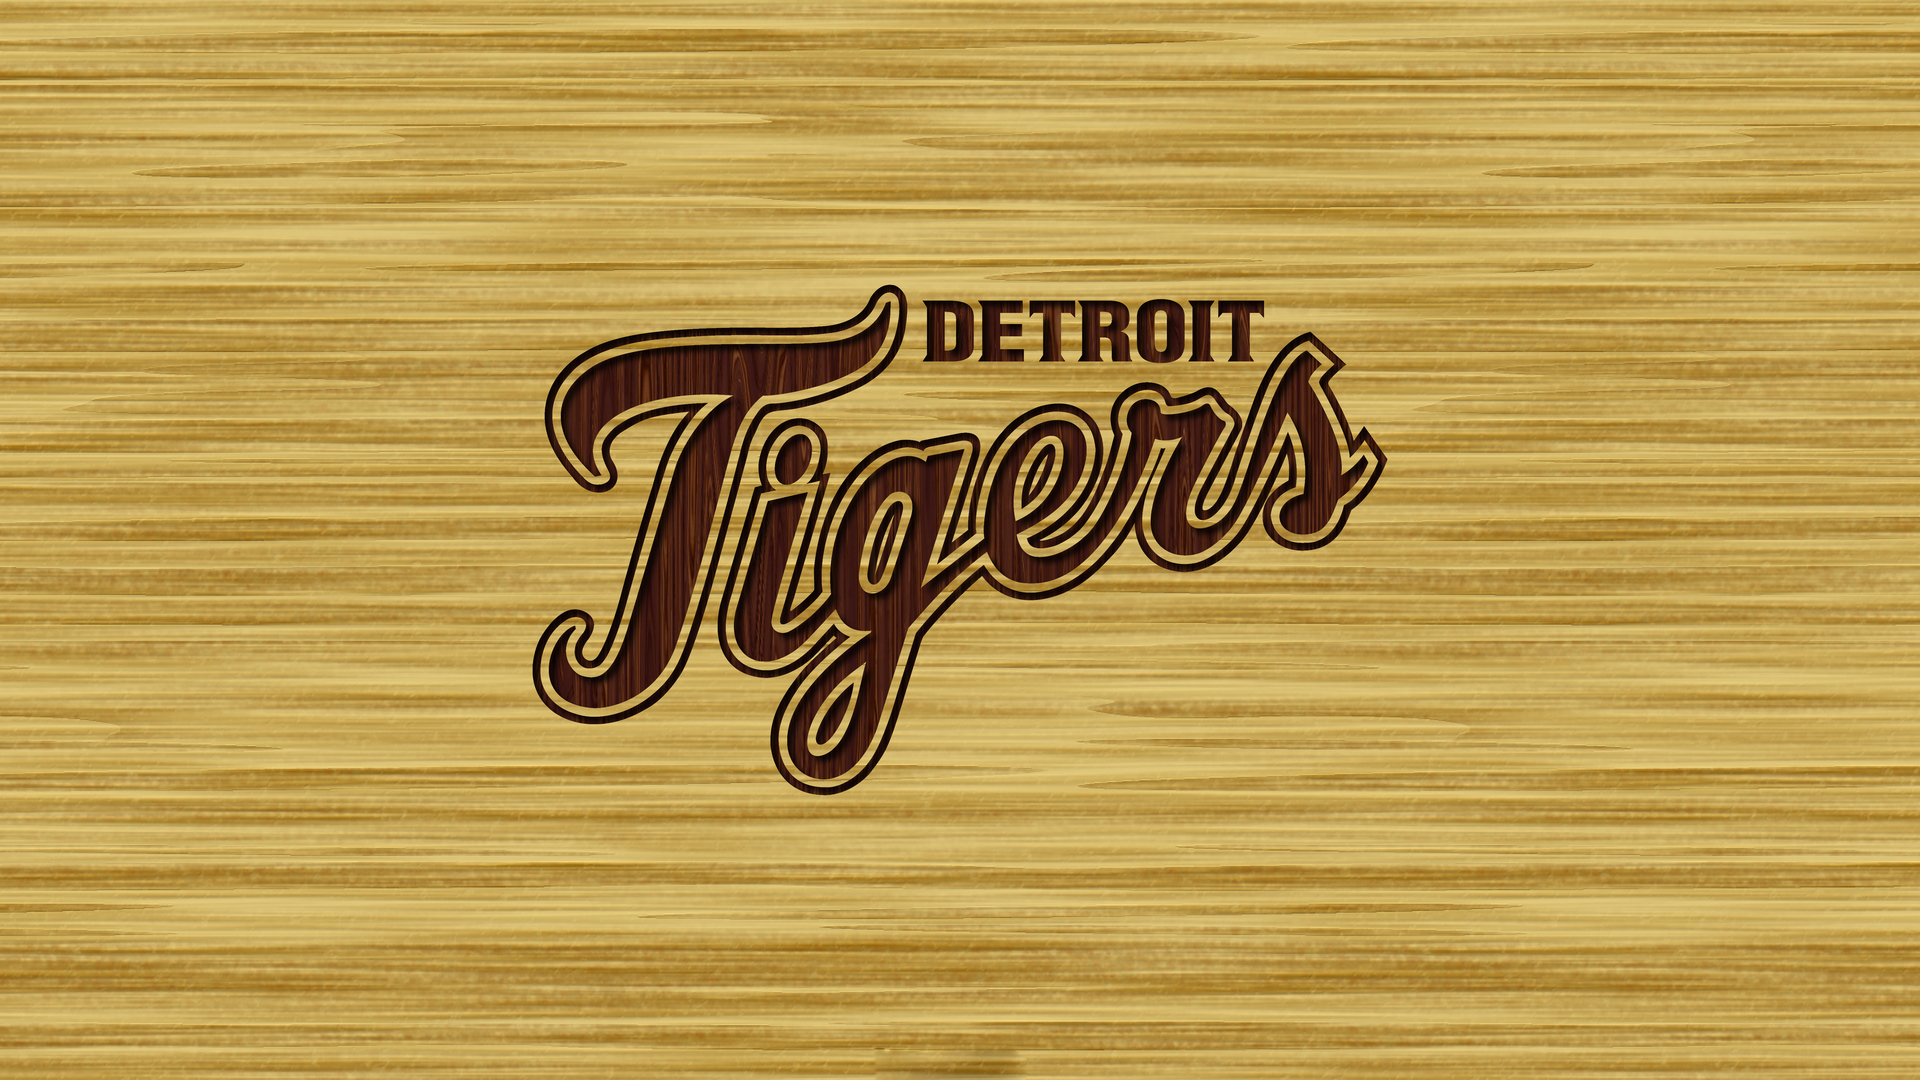 Detroit Tigers Hd Background